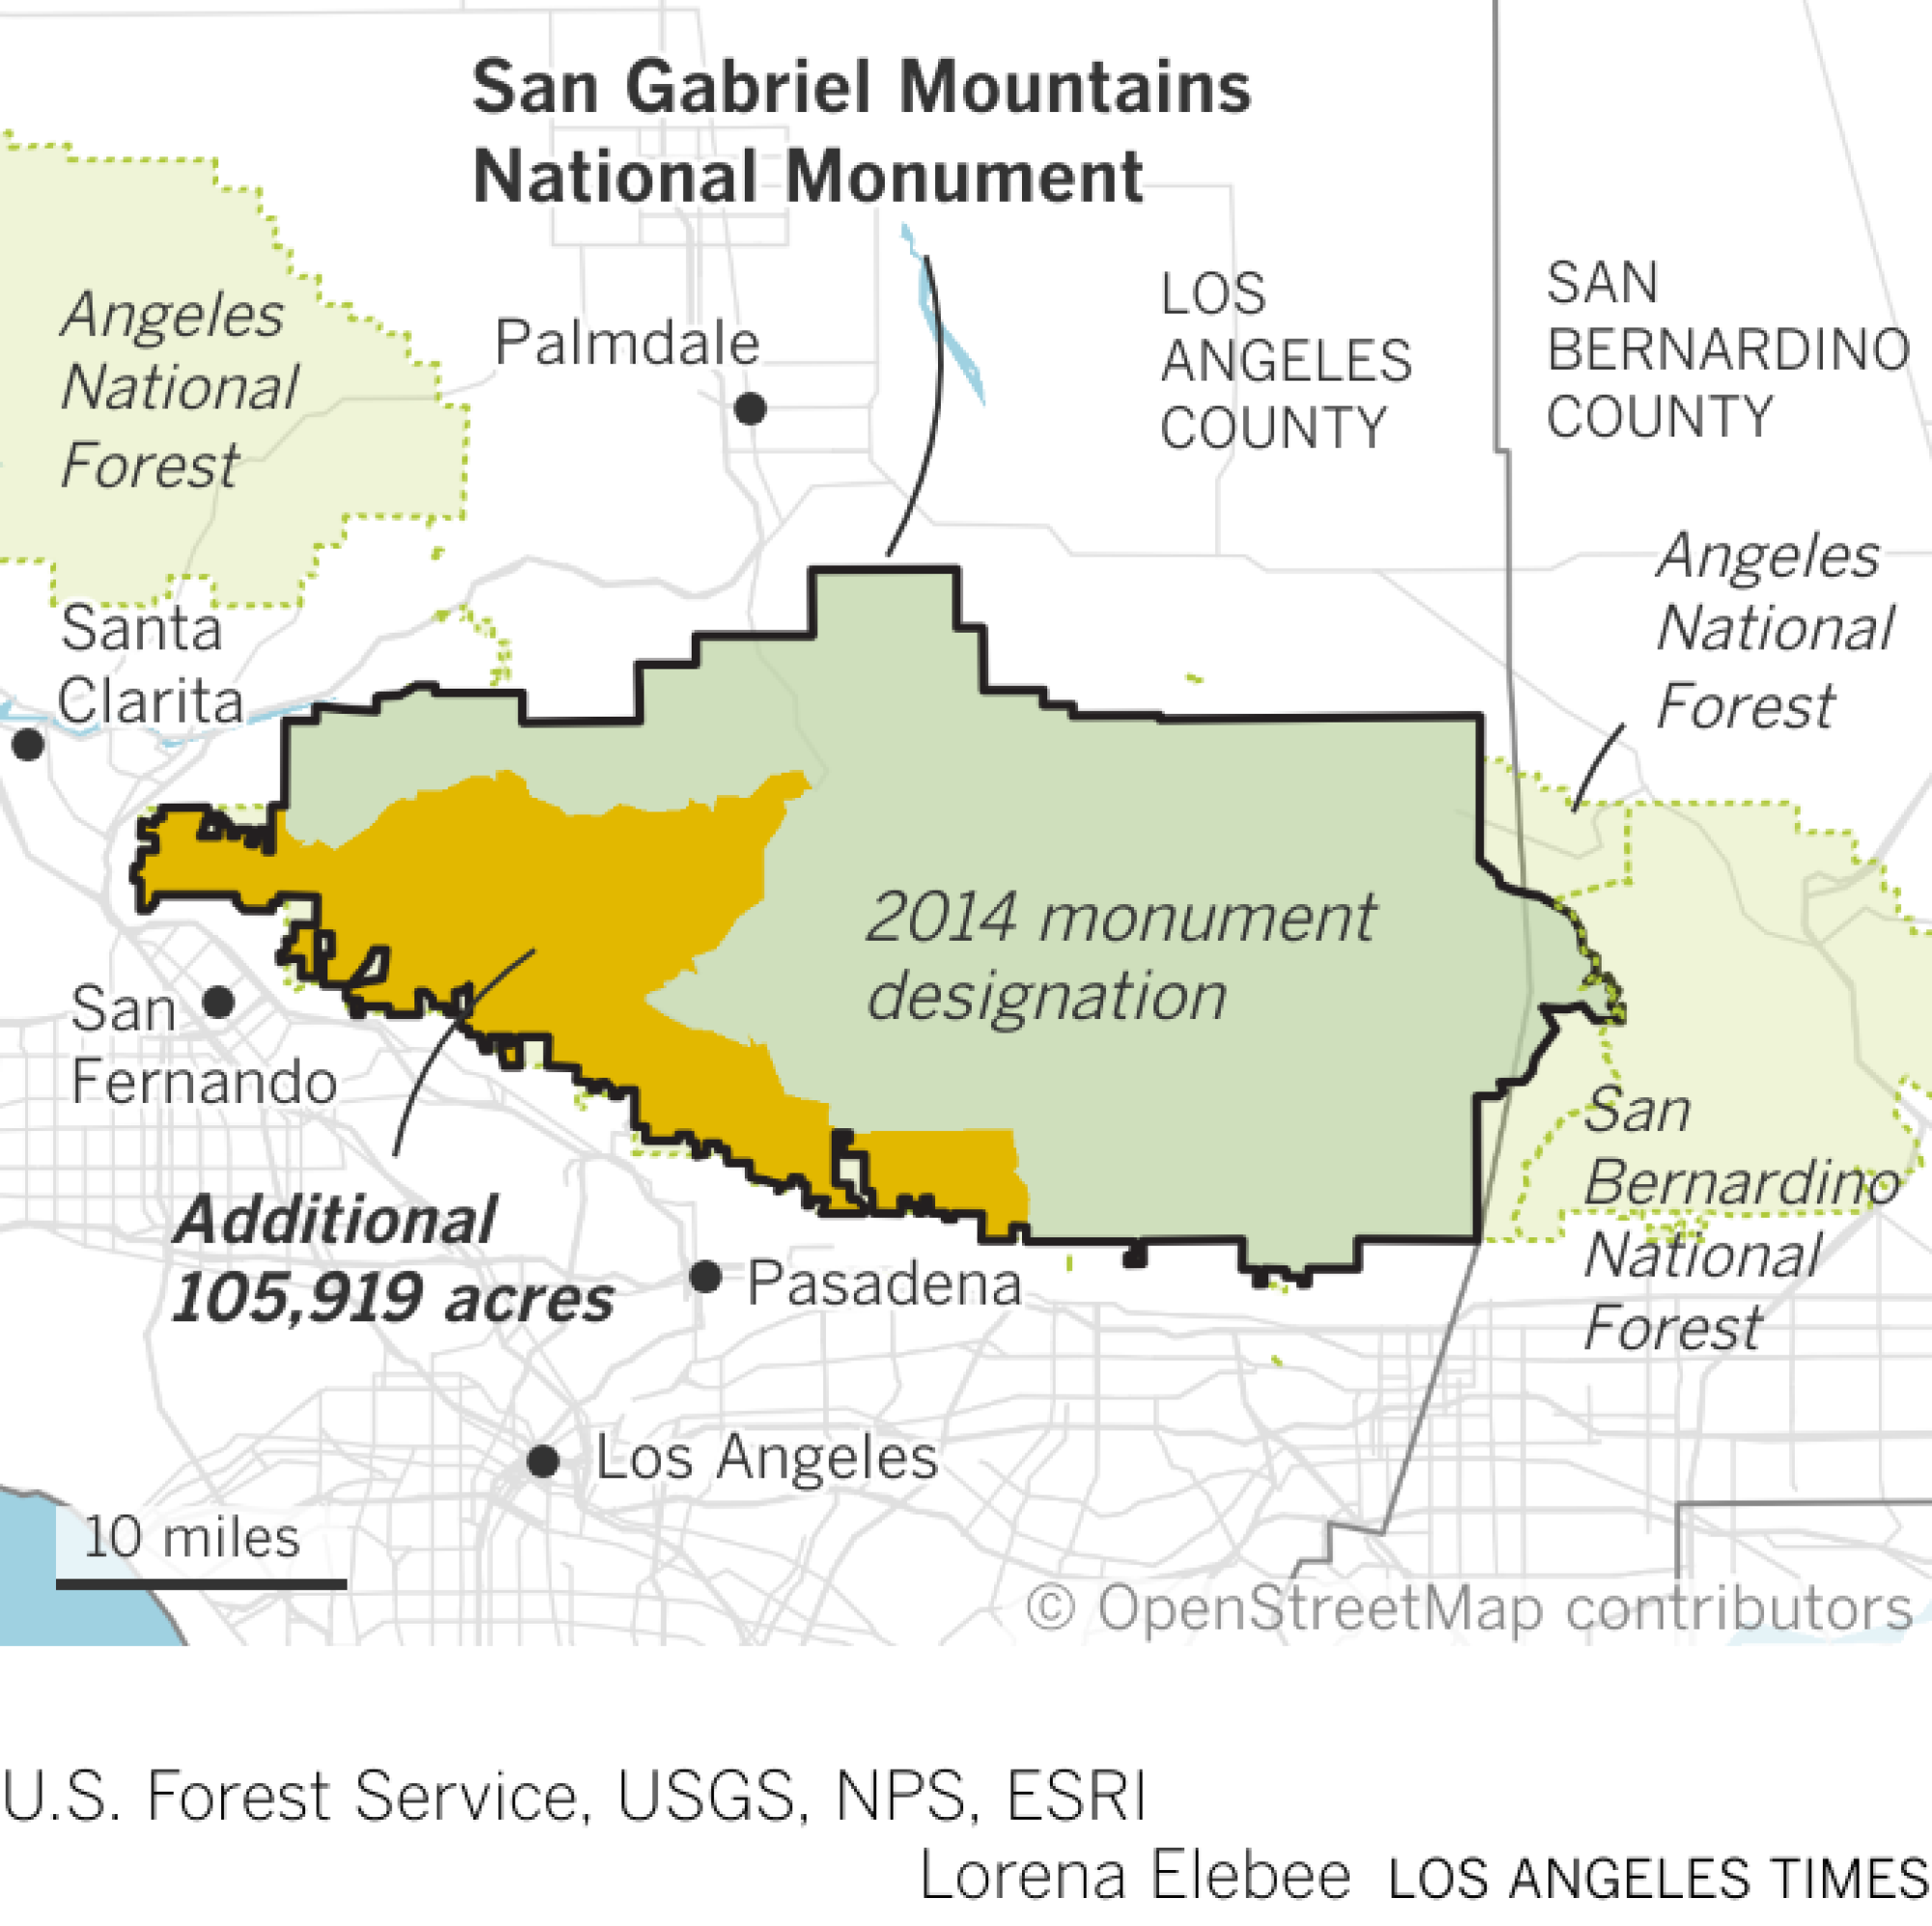 Map shows the boundaries for San Gabriel Mountains National Monument